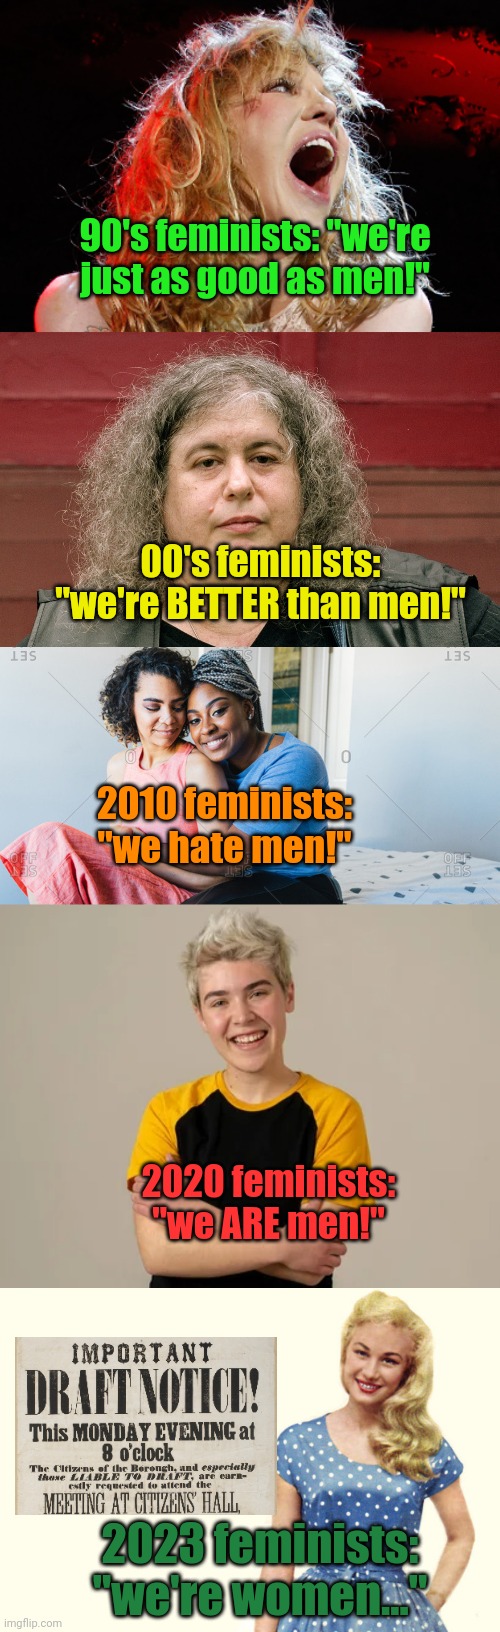 Welp | 90's feminists: "we're just as good as men!"; 00's feminists: "we're BETTER than men!"; 2010 feminists: "we hate men!"; 2020 feminists: "we ARE men!"; 2023 feminists: "we're women..." | image tagged in well yes but actually no,feminism,draft,ww3 | made w/ Imgflip meme maker